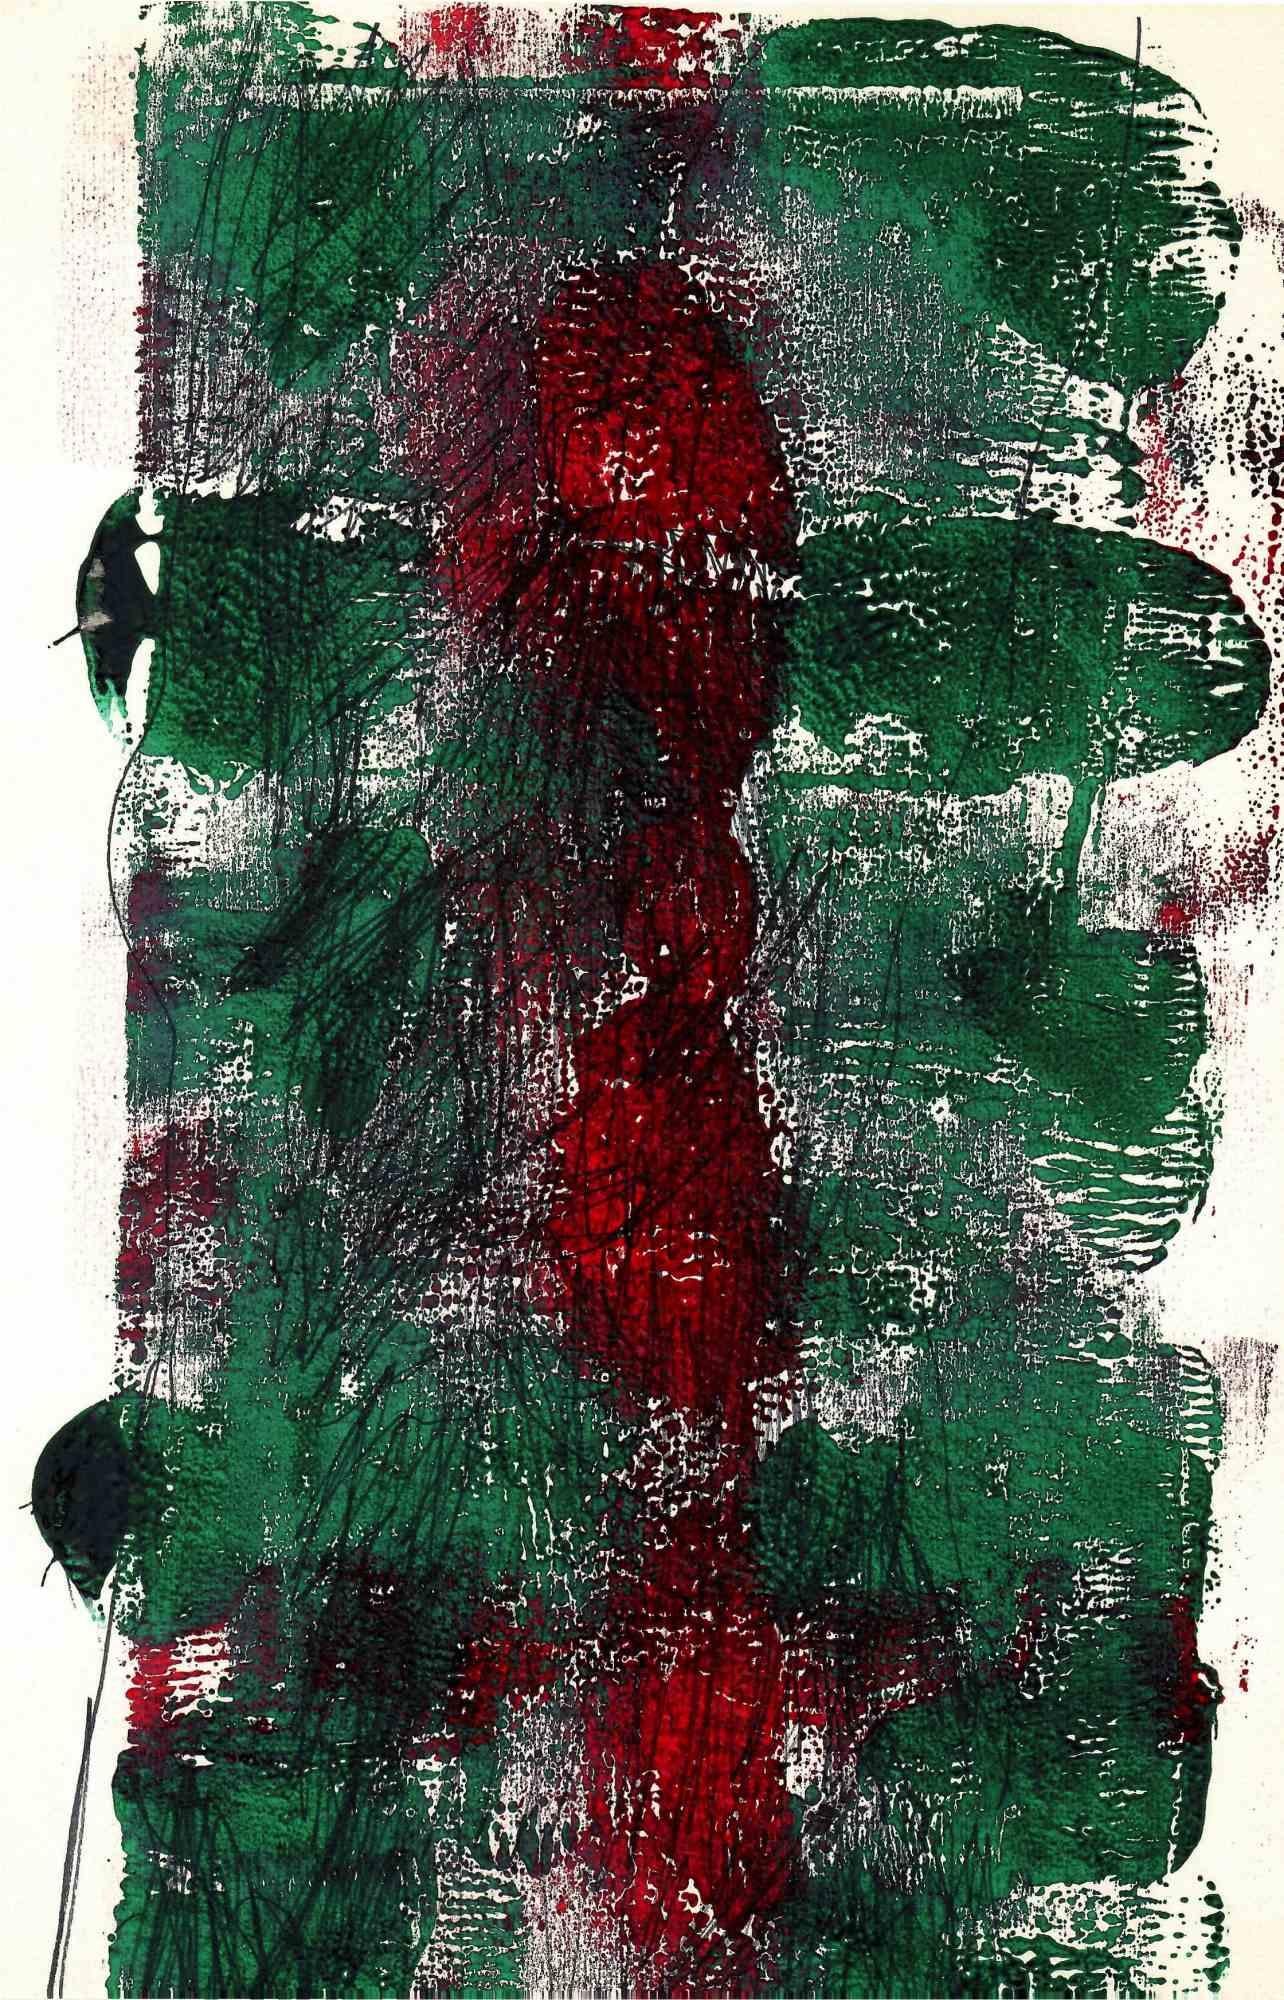 Unknown Abstract Print - Abstract Composition in Green and Red - Original Lithograph -1980s